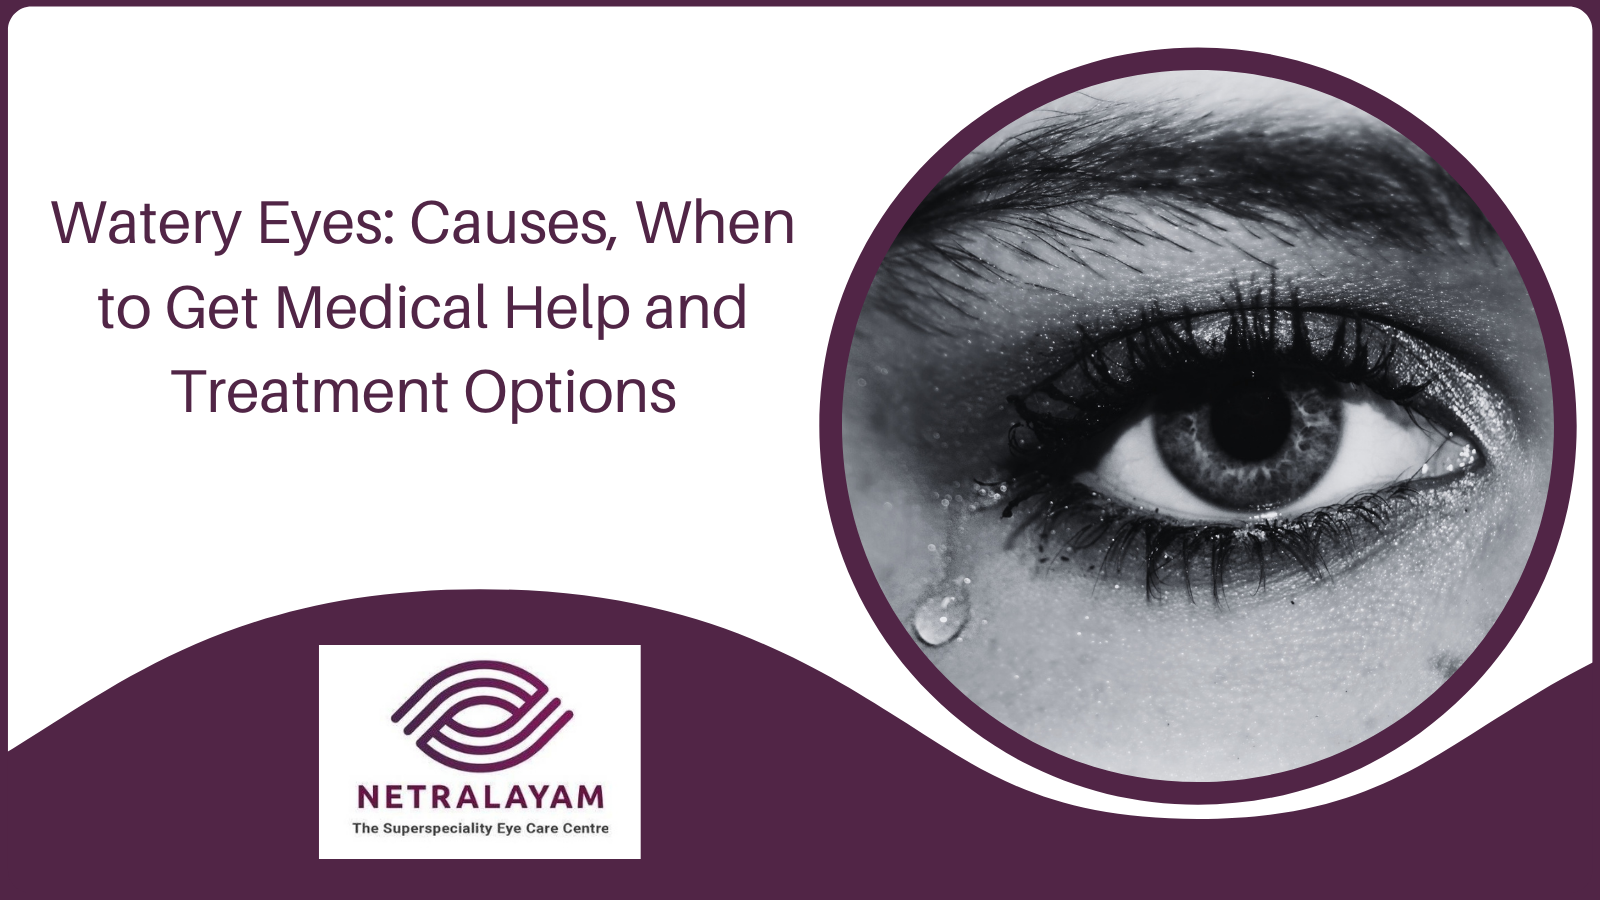 Watery Eyes: Causes, When to Get Medical Help and Treatment Options